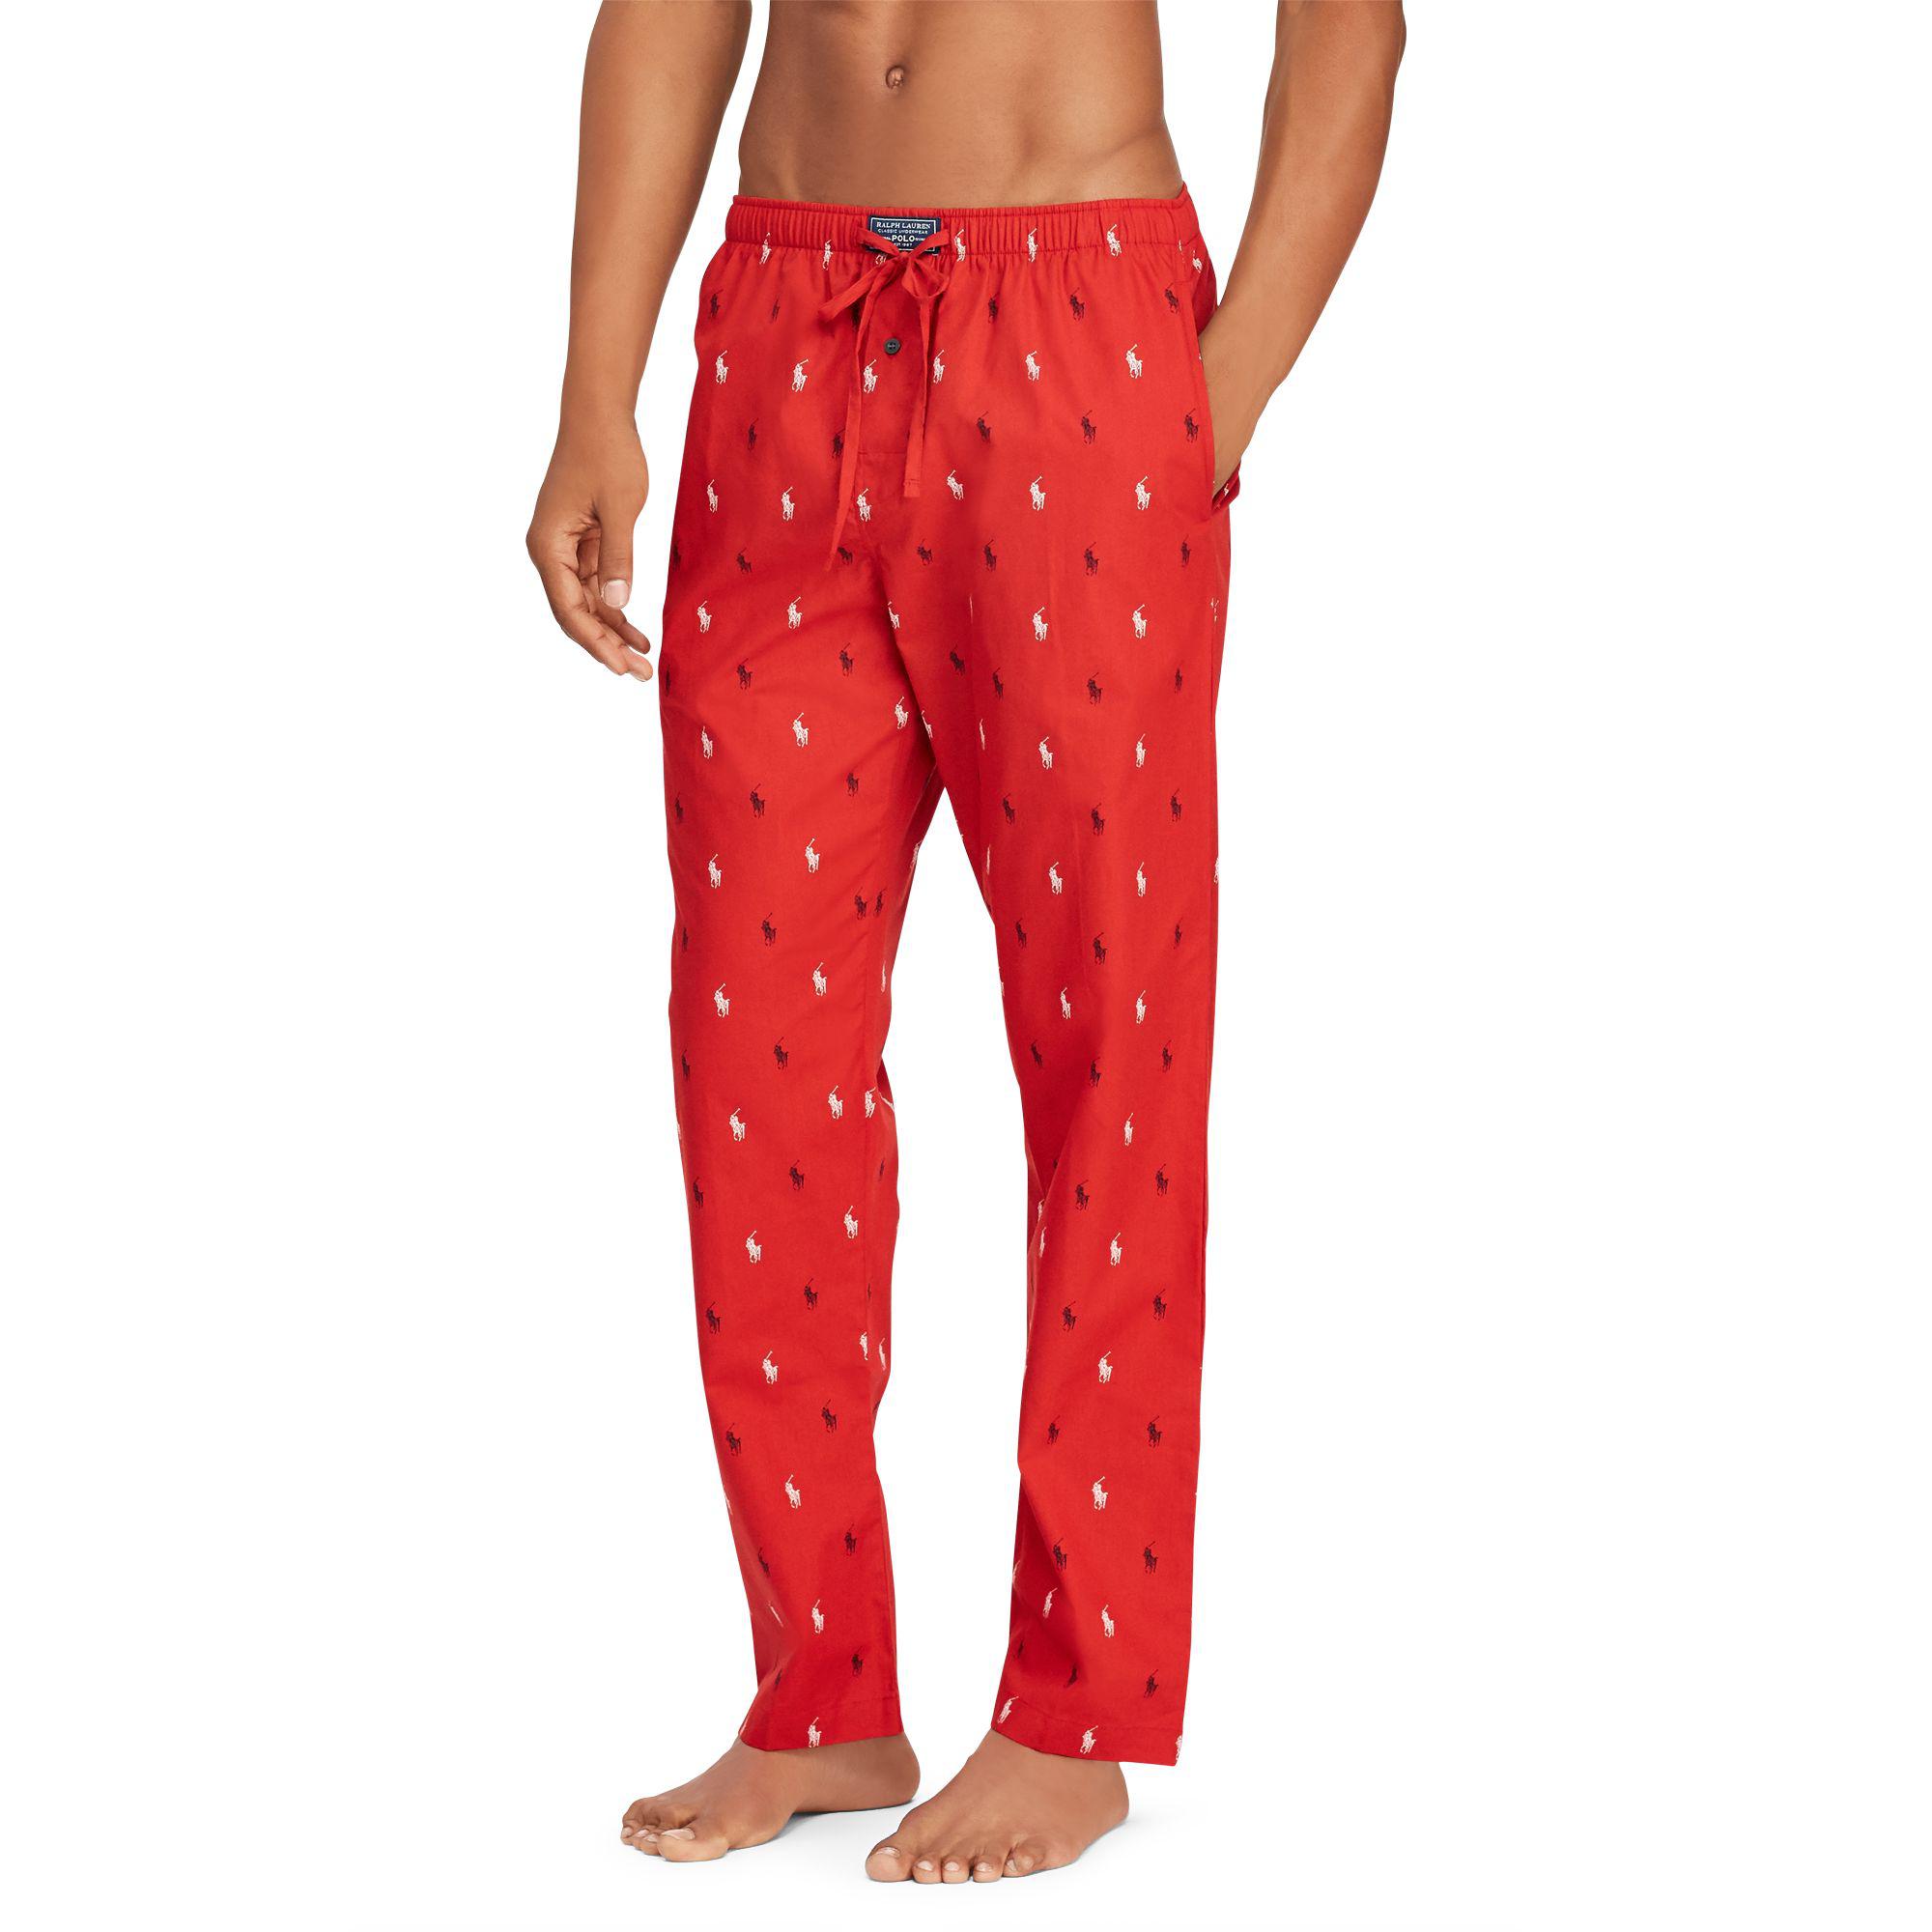 Polo Ralph Lauren Printed Cotton Pajama Pants in Red for Men - Lyst